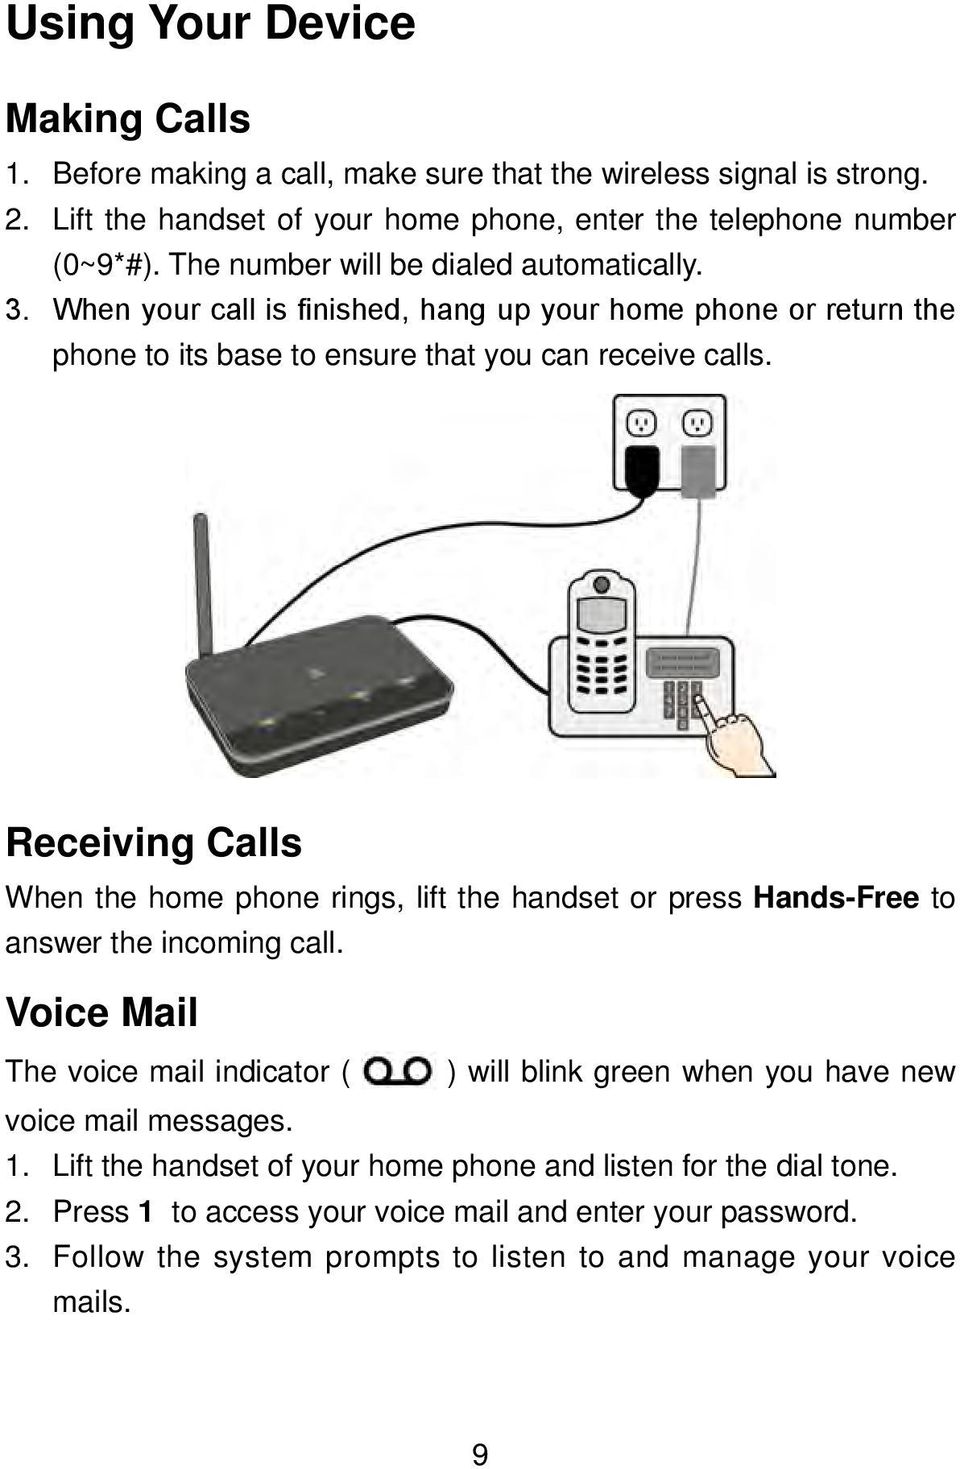 Receiving Calls When the home phone rings, lift the handset or press Hands-Free to answer the incoming call.